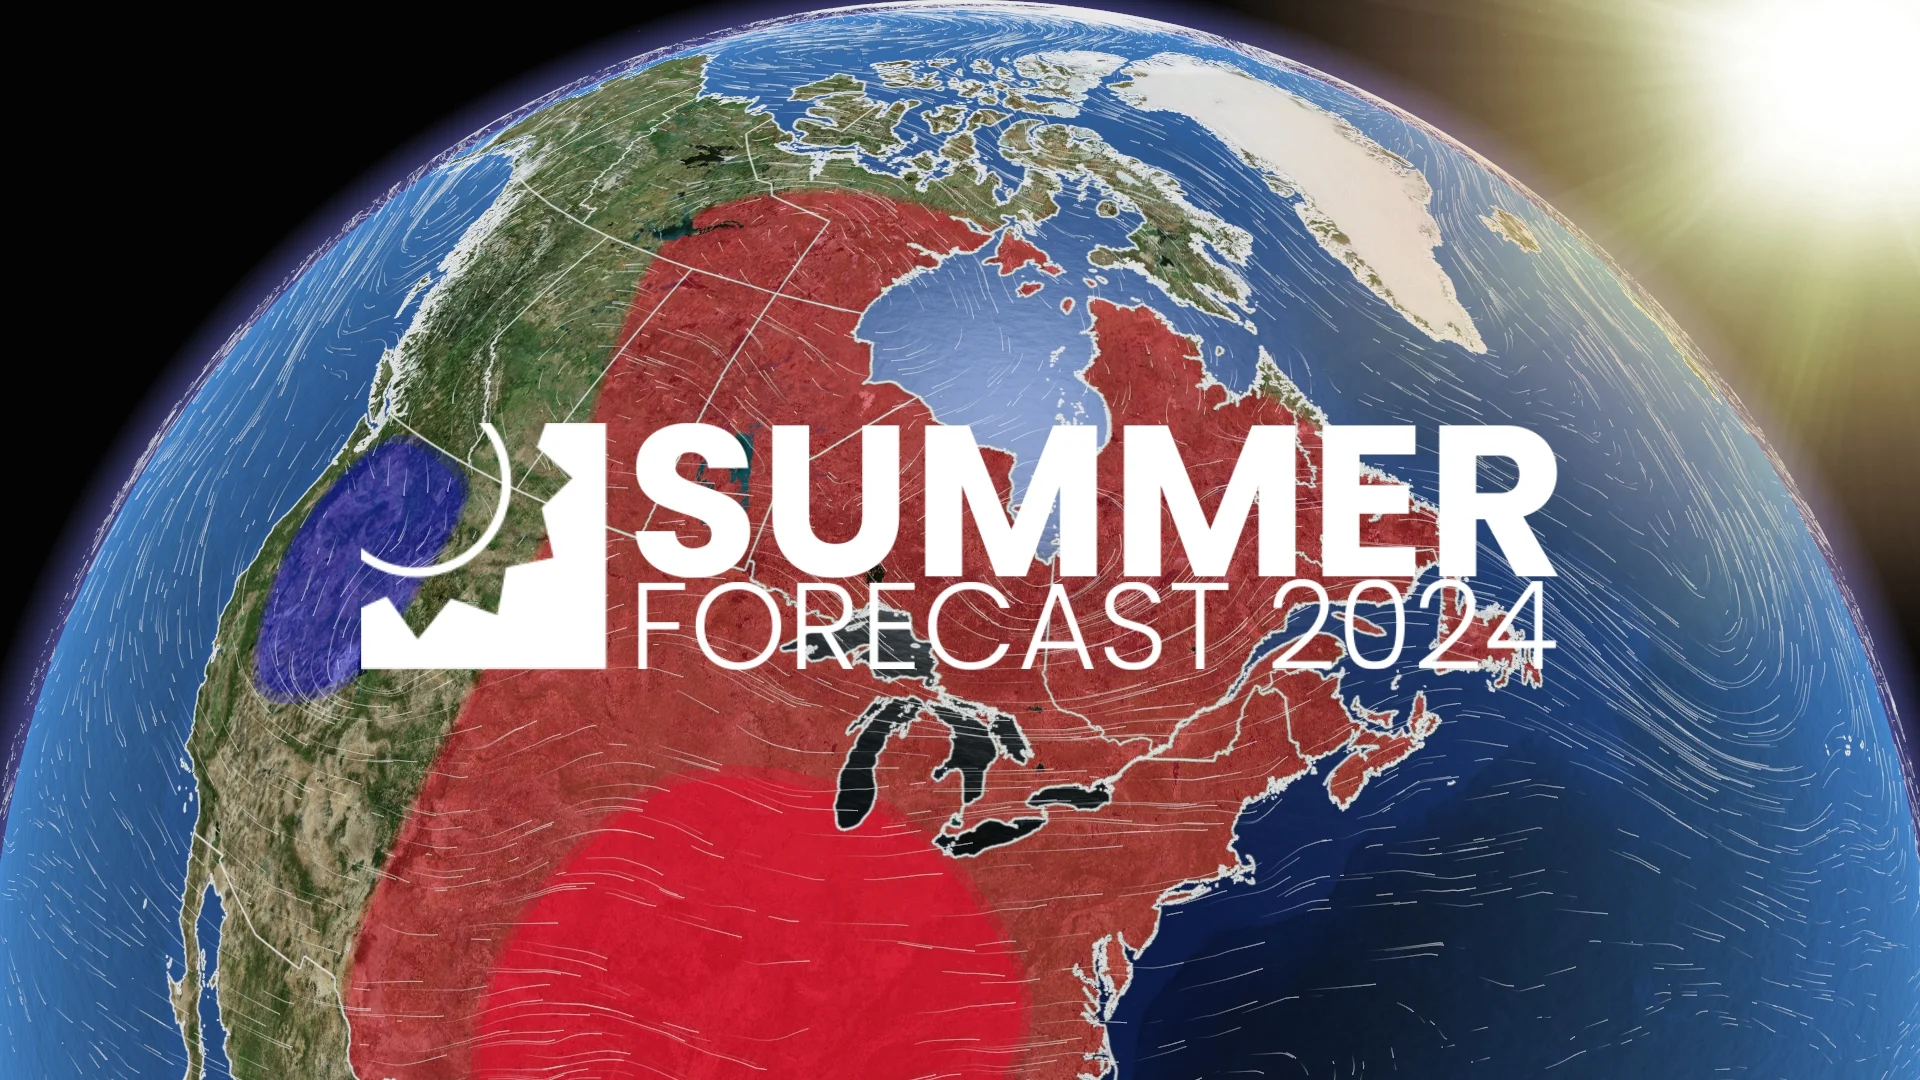 Closely watching the tropics for a 'hyperactive hurricane season' expected this summer. See what's coming in our official Summer Forecast, here